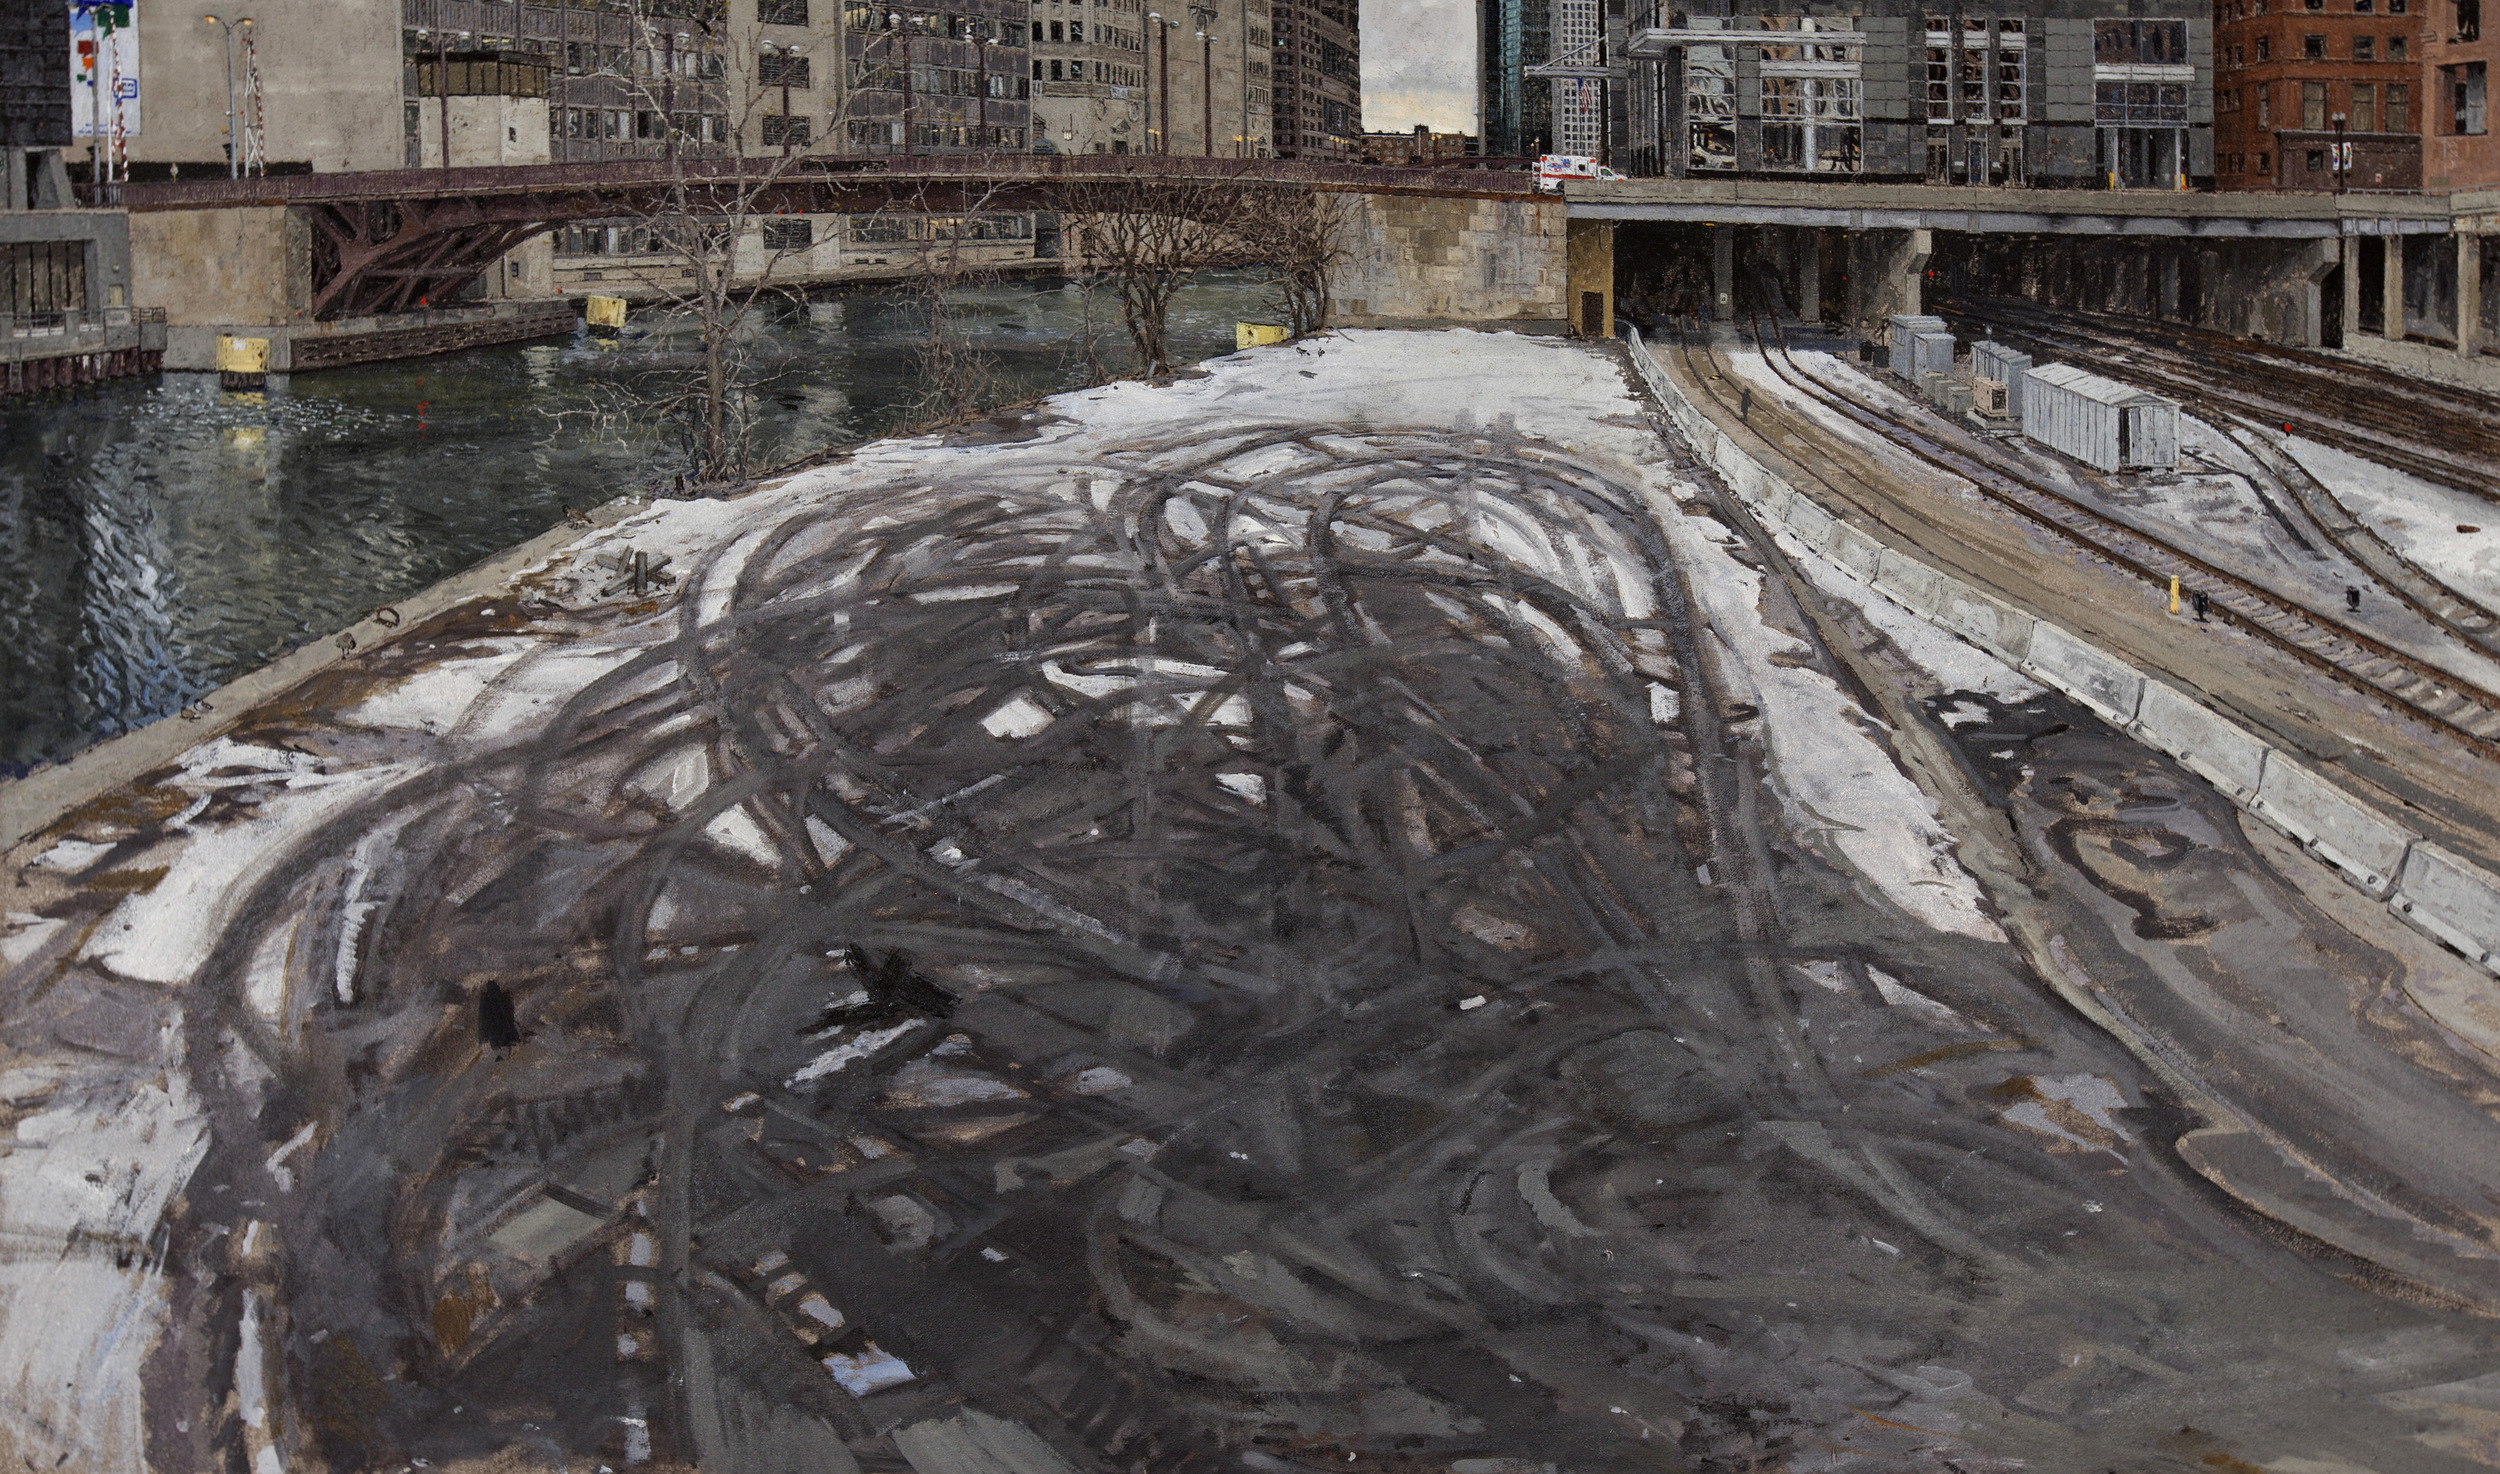 LOOKING SOUTH FROM LAKE ST. BRIDGE PRIOR TO  DEVELOPMENT , OIL ON LINEN, 28X42'', 2010